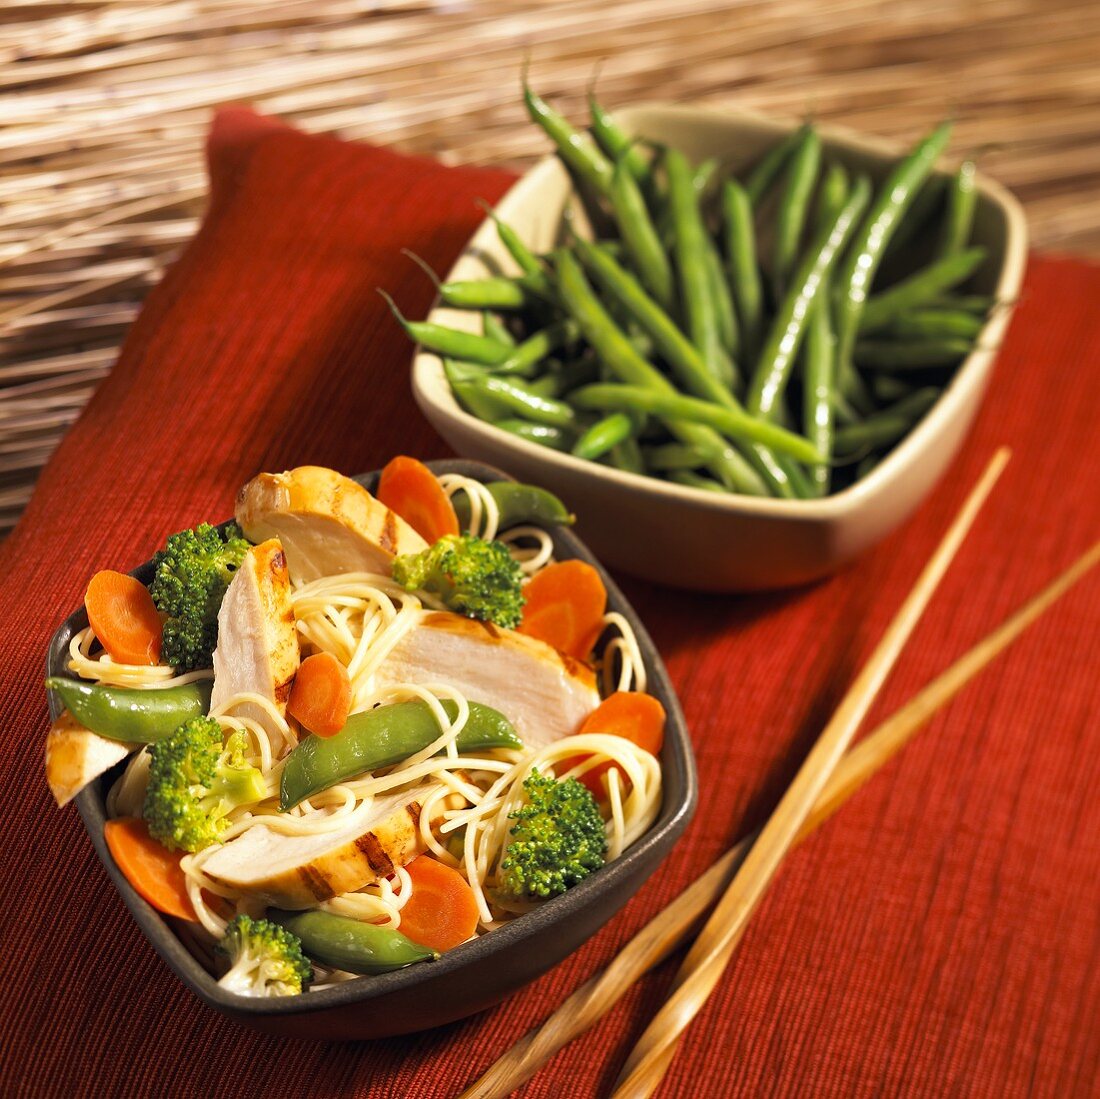 Chicken and Noodles Stir Fried with Vegetables; Green Beans